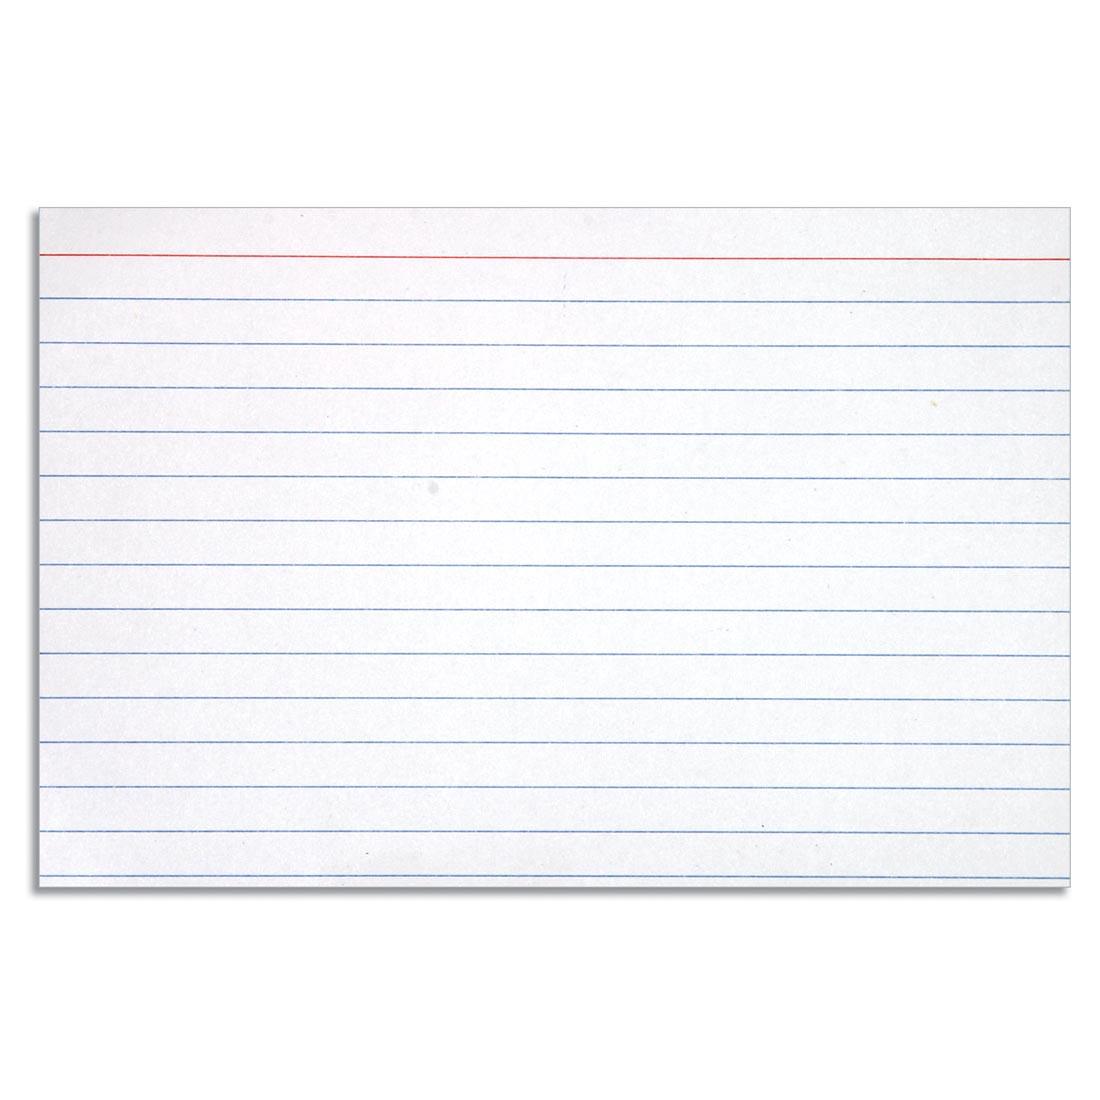 Mead Index Cards Ruled White 4x6